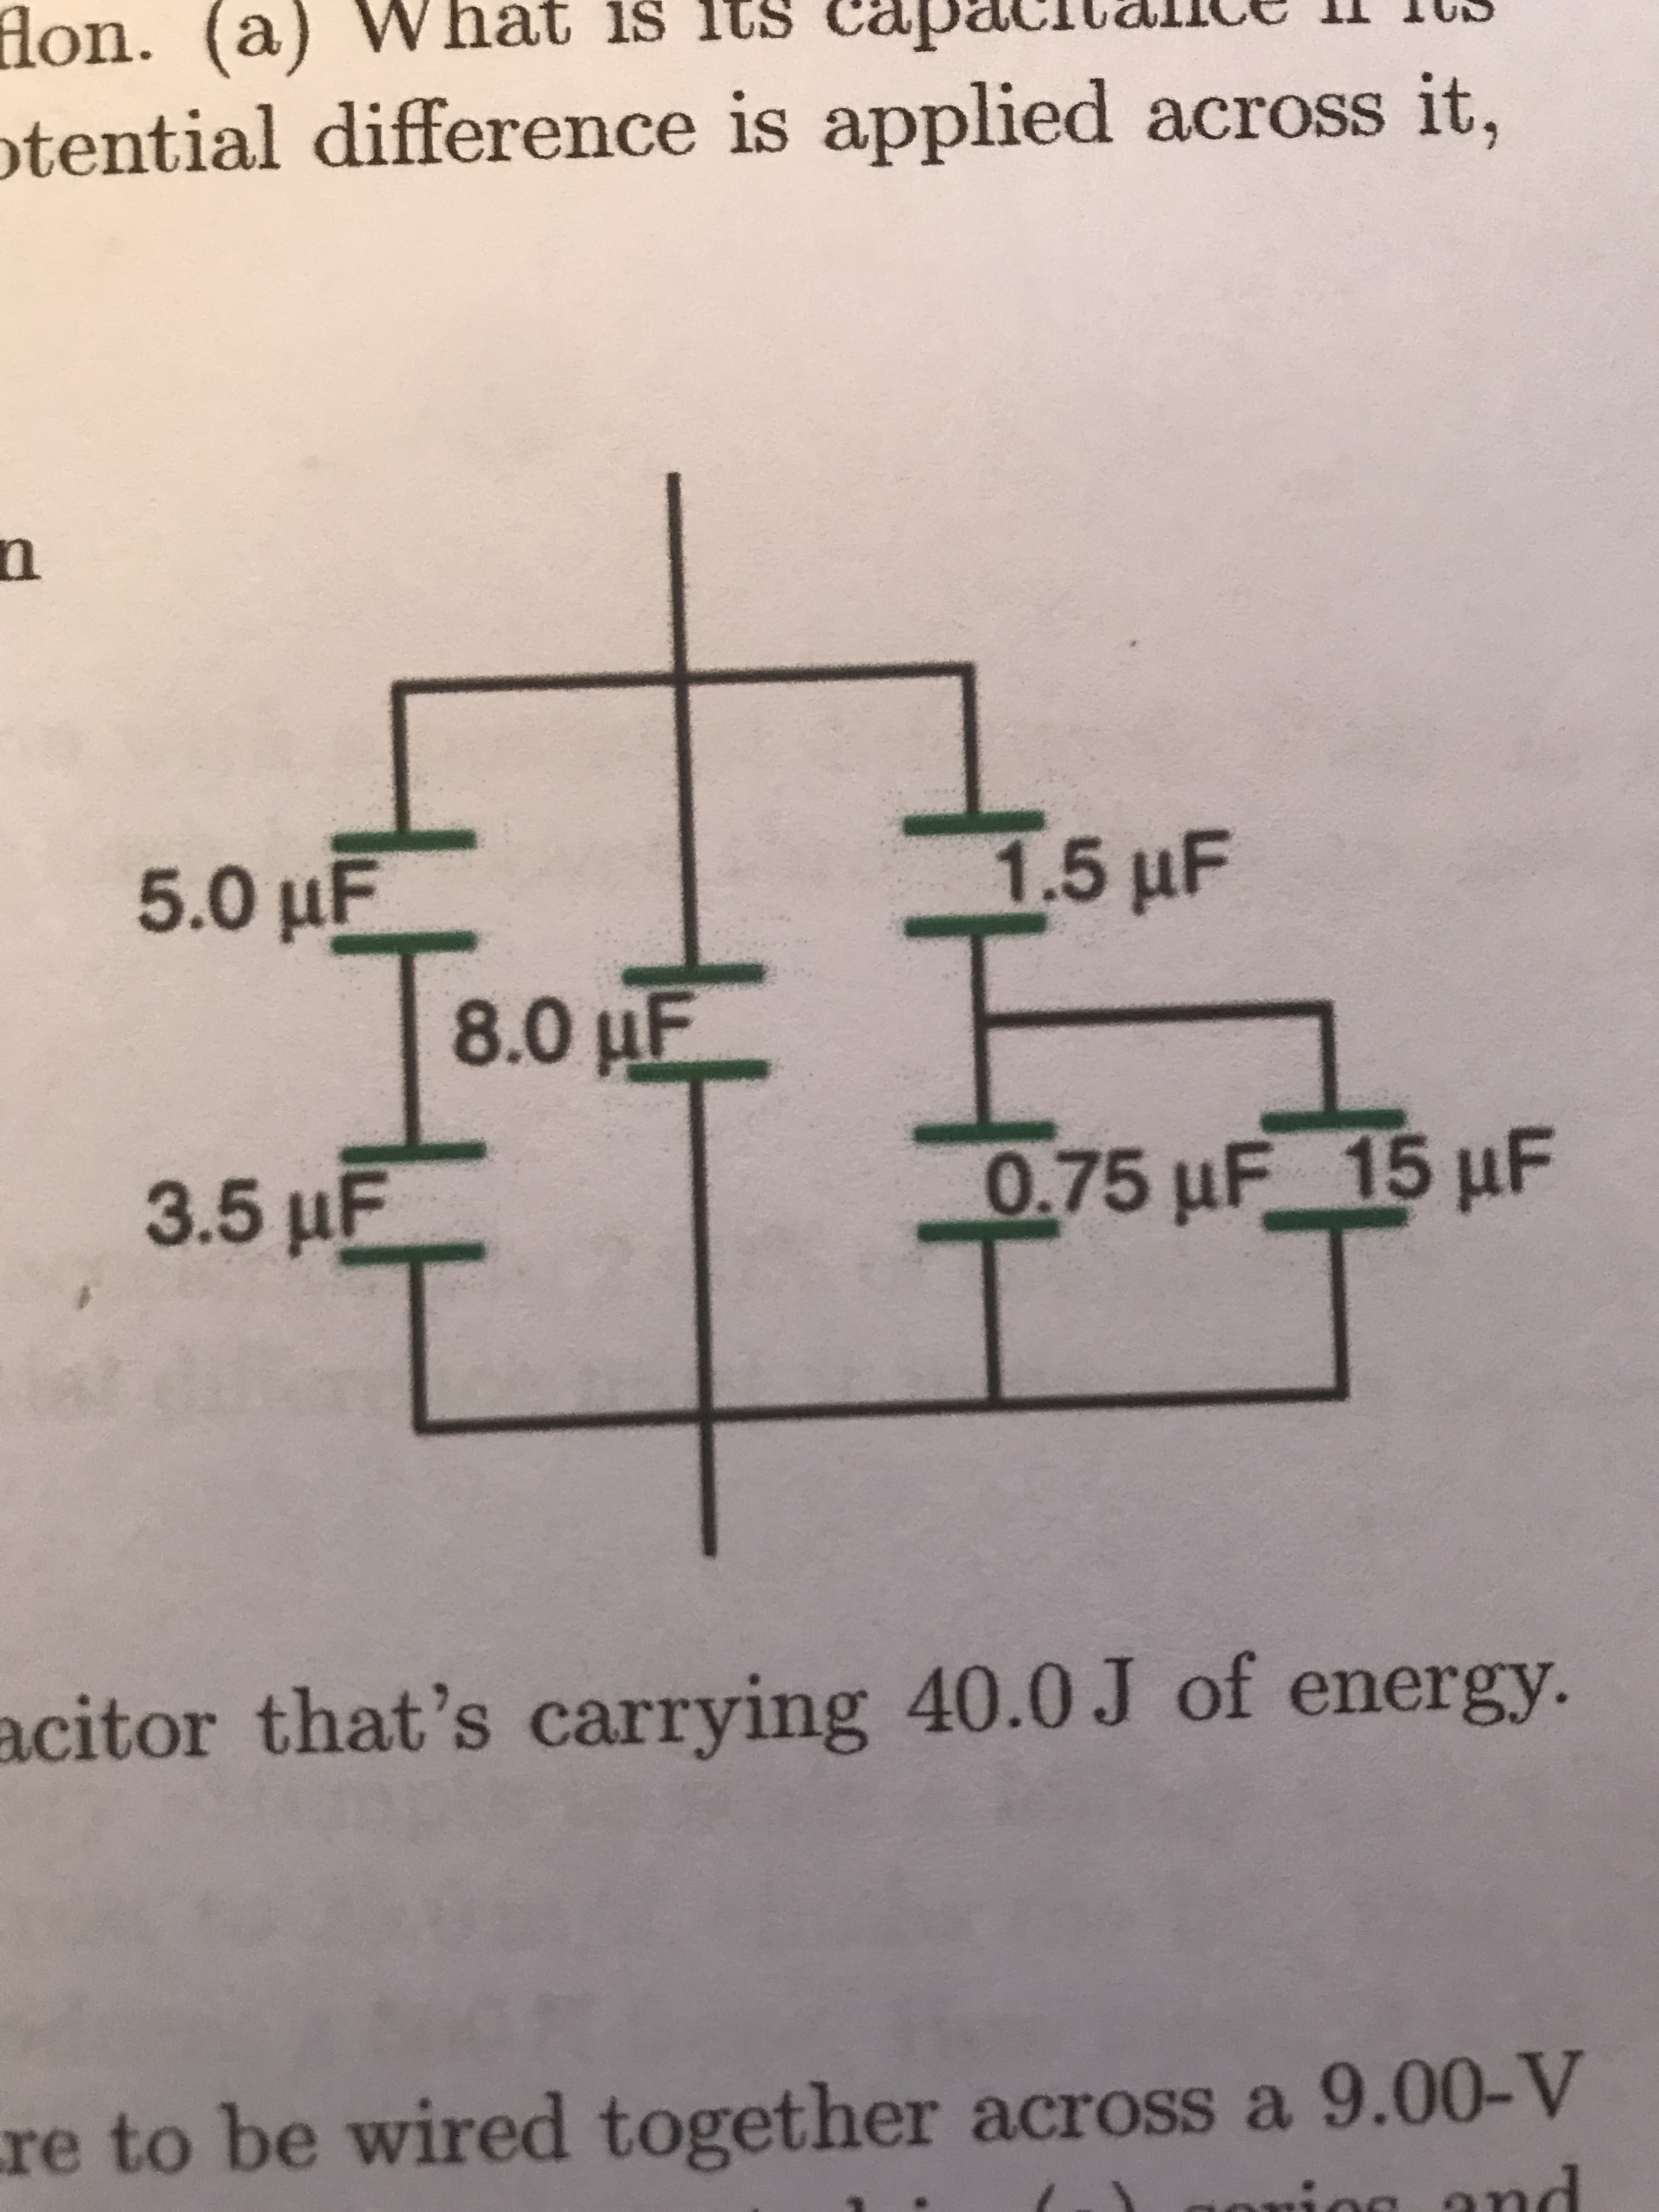 flon. (a)
otential difference is applied across it,
hat is itS
in
5.0 μΕ.
15 μF
8.0 µF
3.5 µF
0.75 uF 15 µF
acitor that's carrying 40.0J of energy.
re to be wired together across a 9.00-V
ing and
